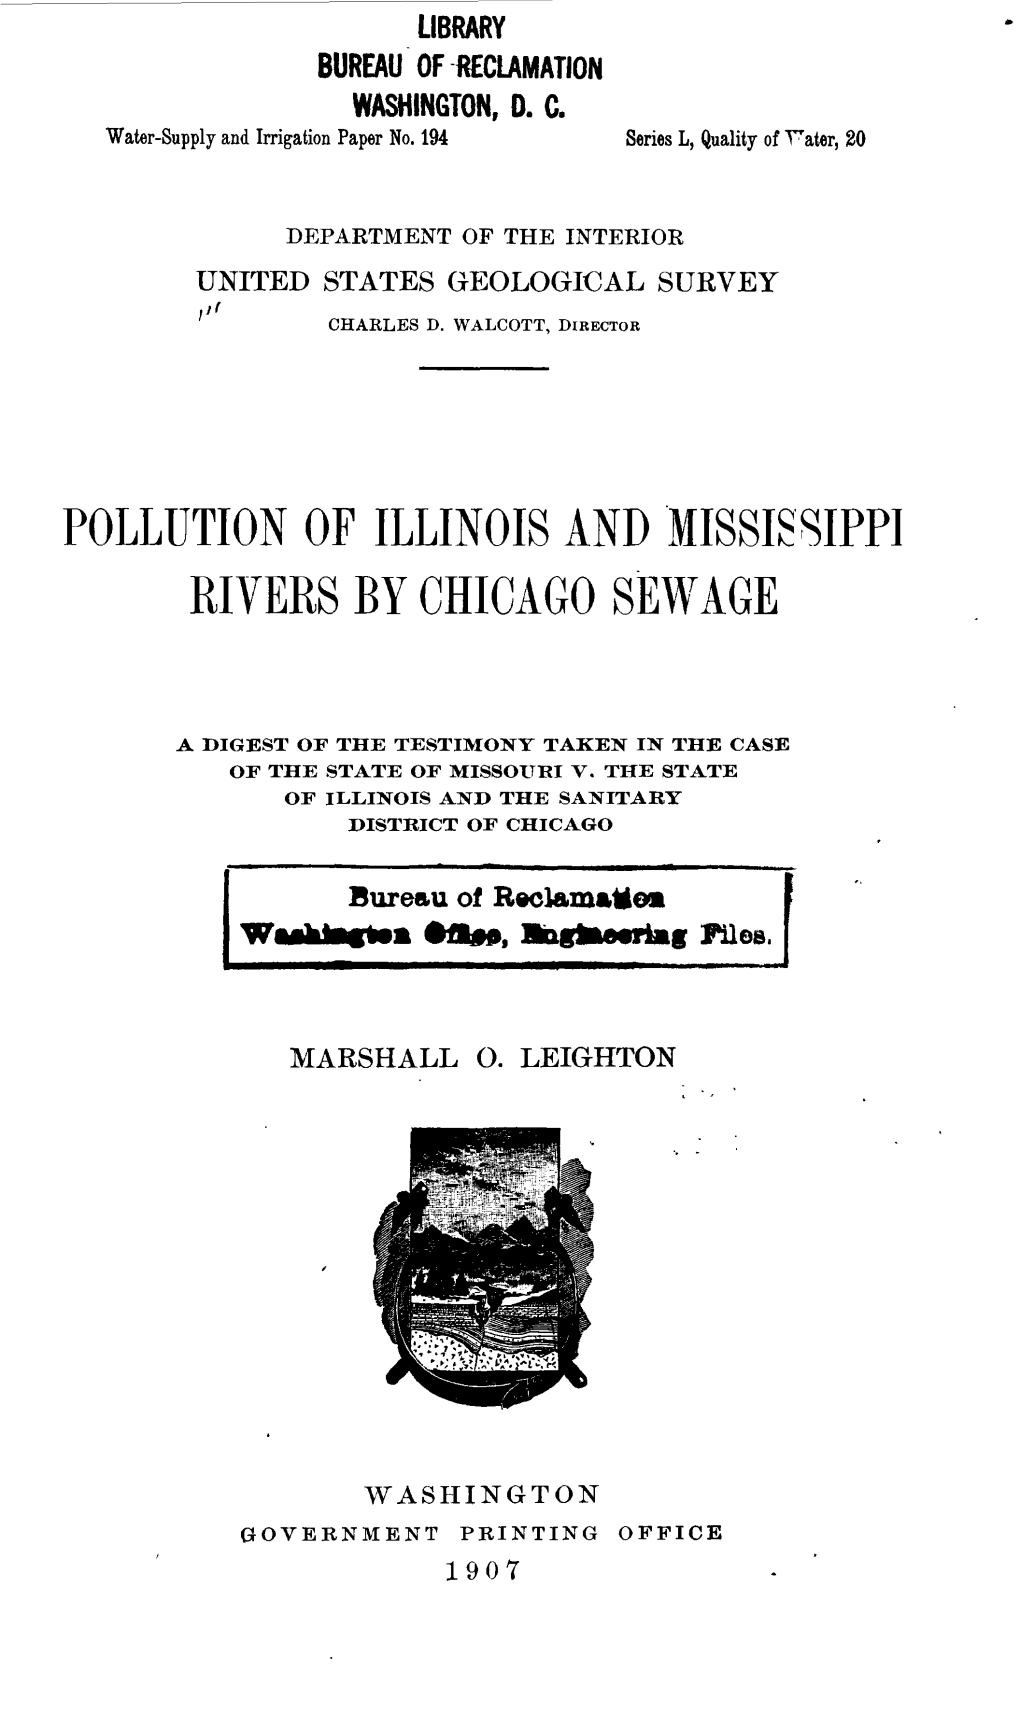 Pollution of Illinois and Mississippi Rivers by Chicago Sewage